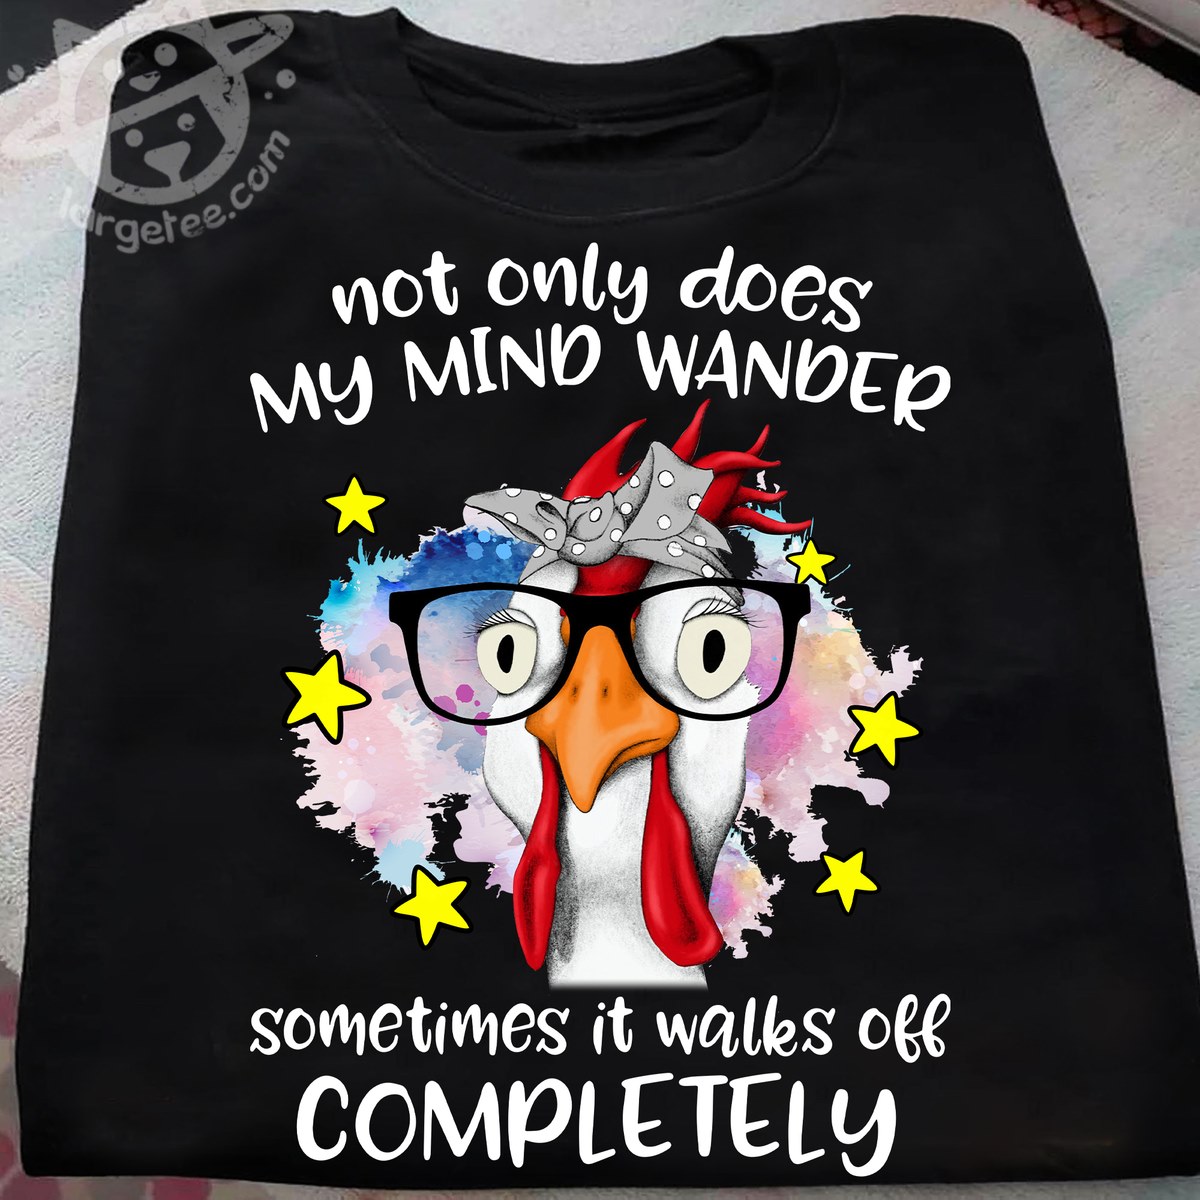 Not only does my mind wander sometimes it walks off completely - Grumpy chickens